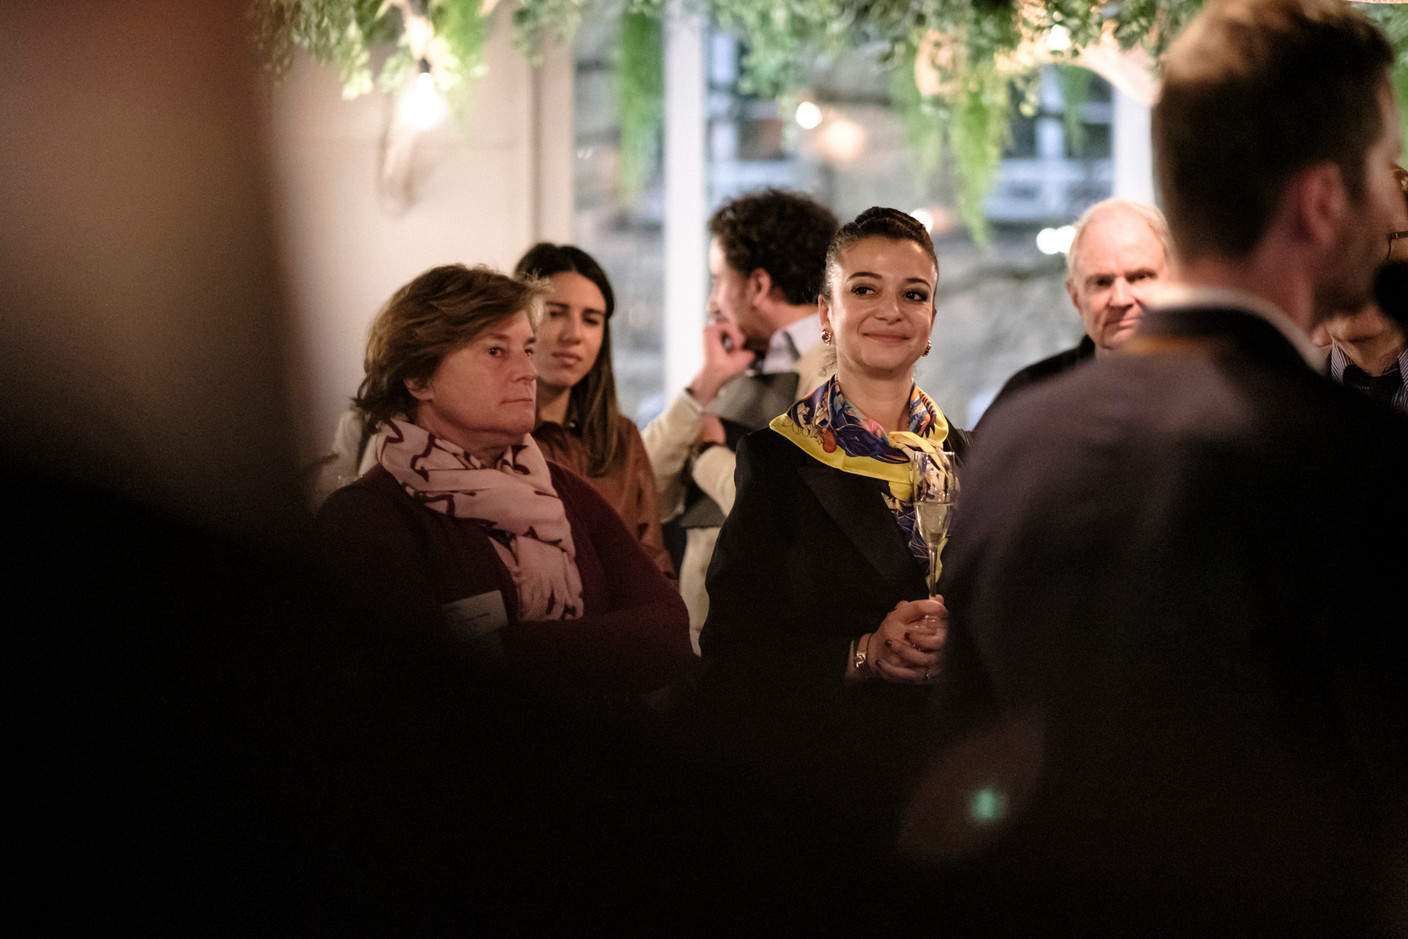 Yasmine Doss Bennani (Credit Suisse) at the Luxembourg Association of Family Offices (LAFO) winter 2023 cocktail, which took place on 8 February 2023 at Hertz PopUp. Photo: Jan Hanrion for LAFO